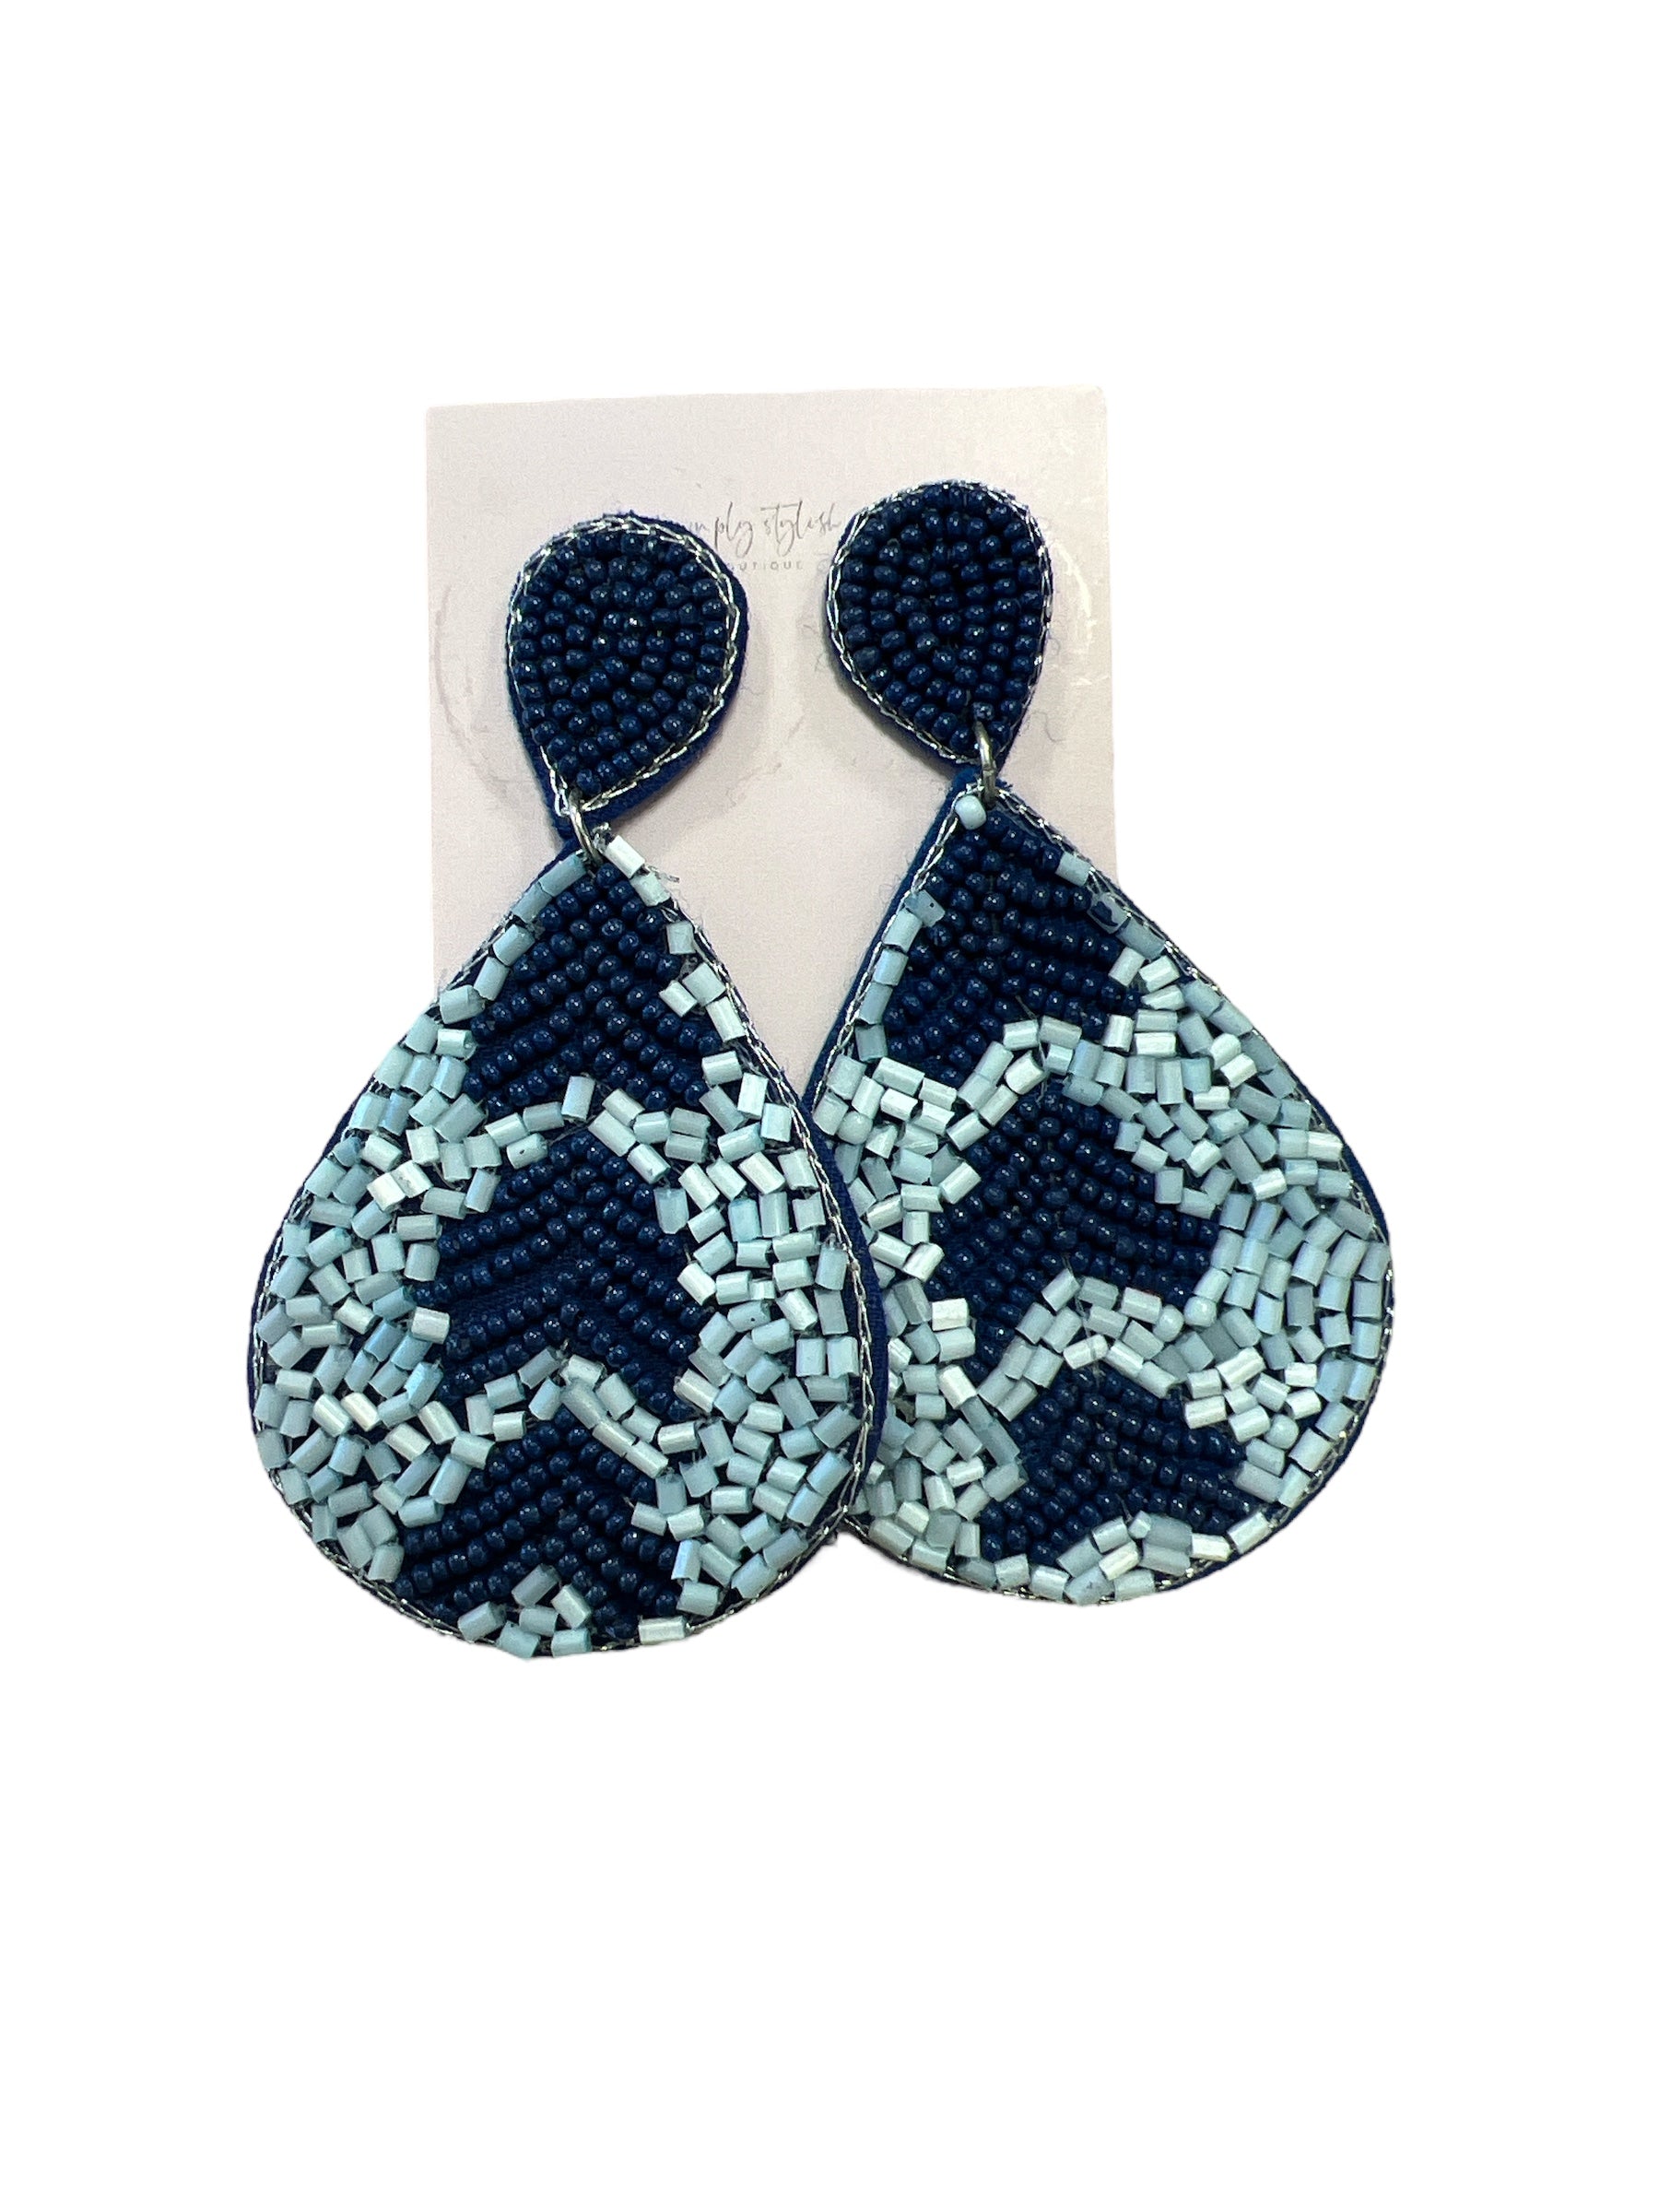 Oceans Blue Earring-410 Jewelry-Simply Stylish Boutique-Simply Stylish Boutique | Women’s & Kid’s Fashion | Paducah, KY